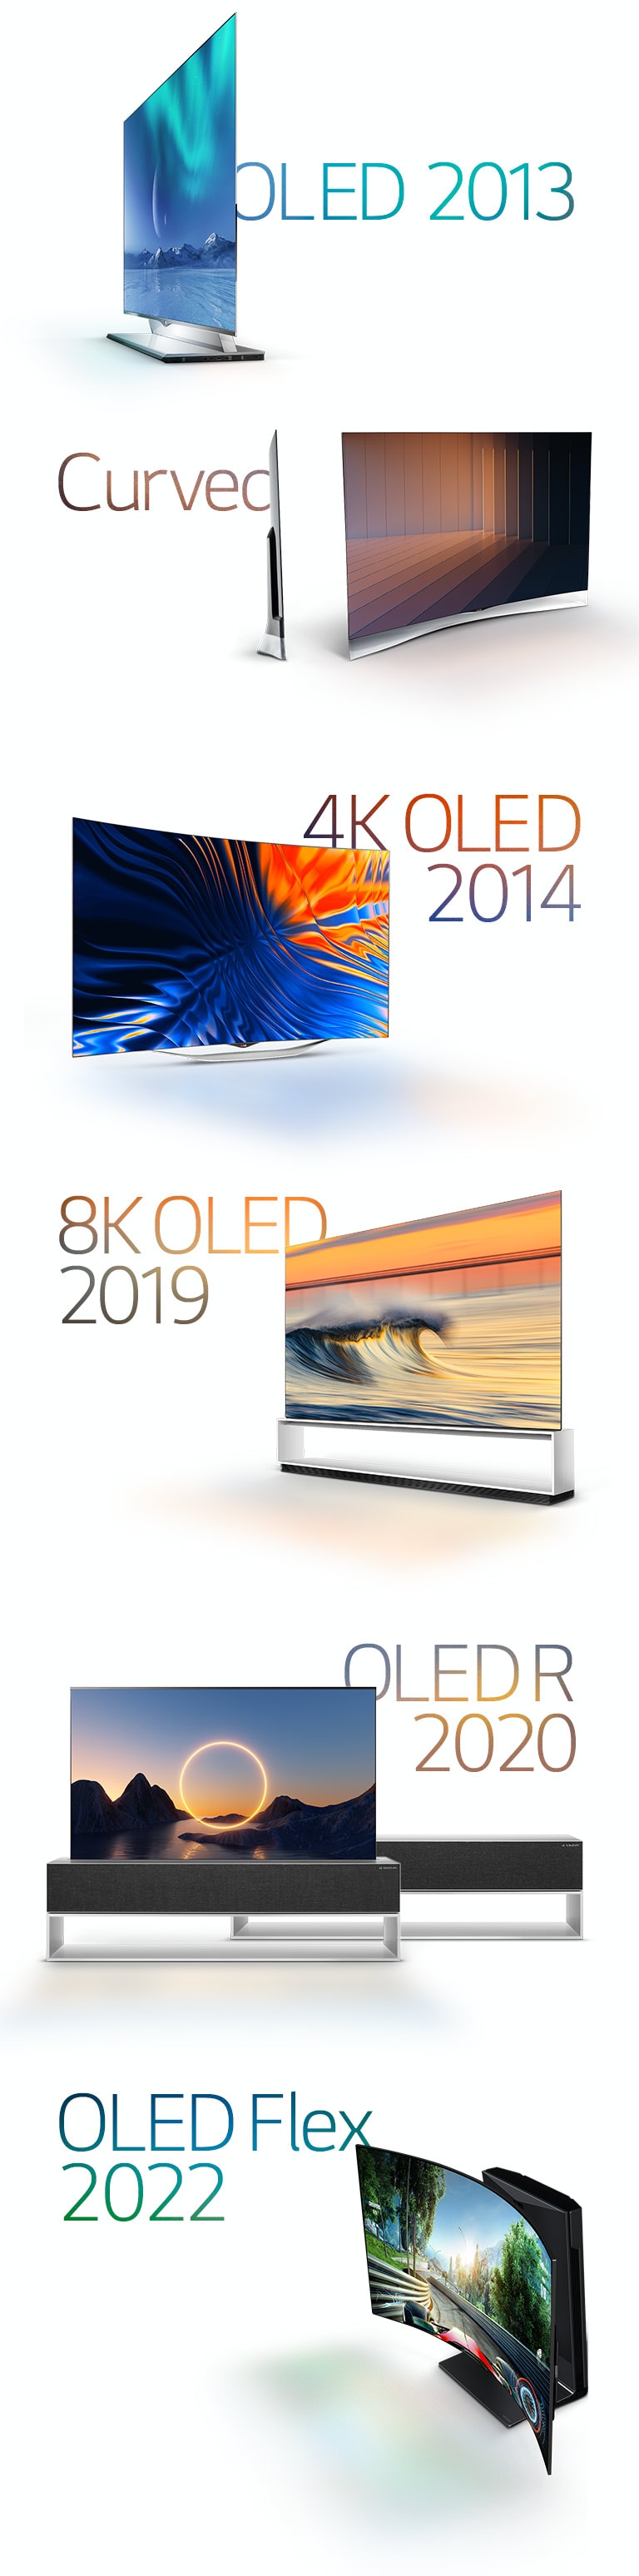 Images of the notable LG OLEDs: 2013's curved OLED, 2014's 4K OLED, 2019's 8K OLED, 2020's rollable OLED, and 2022's LG OLED Flex.